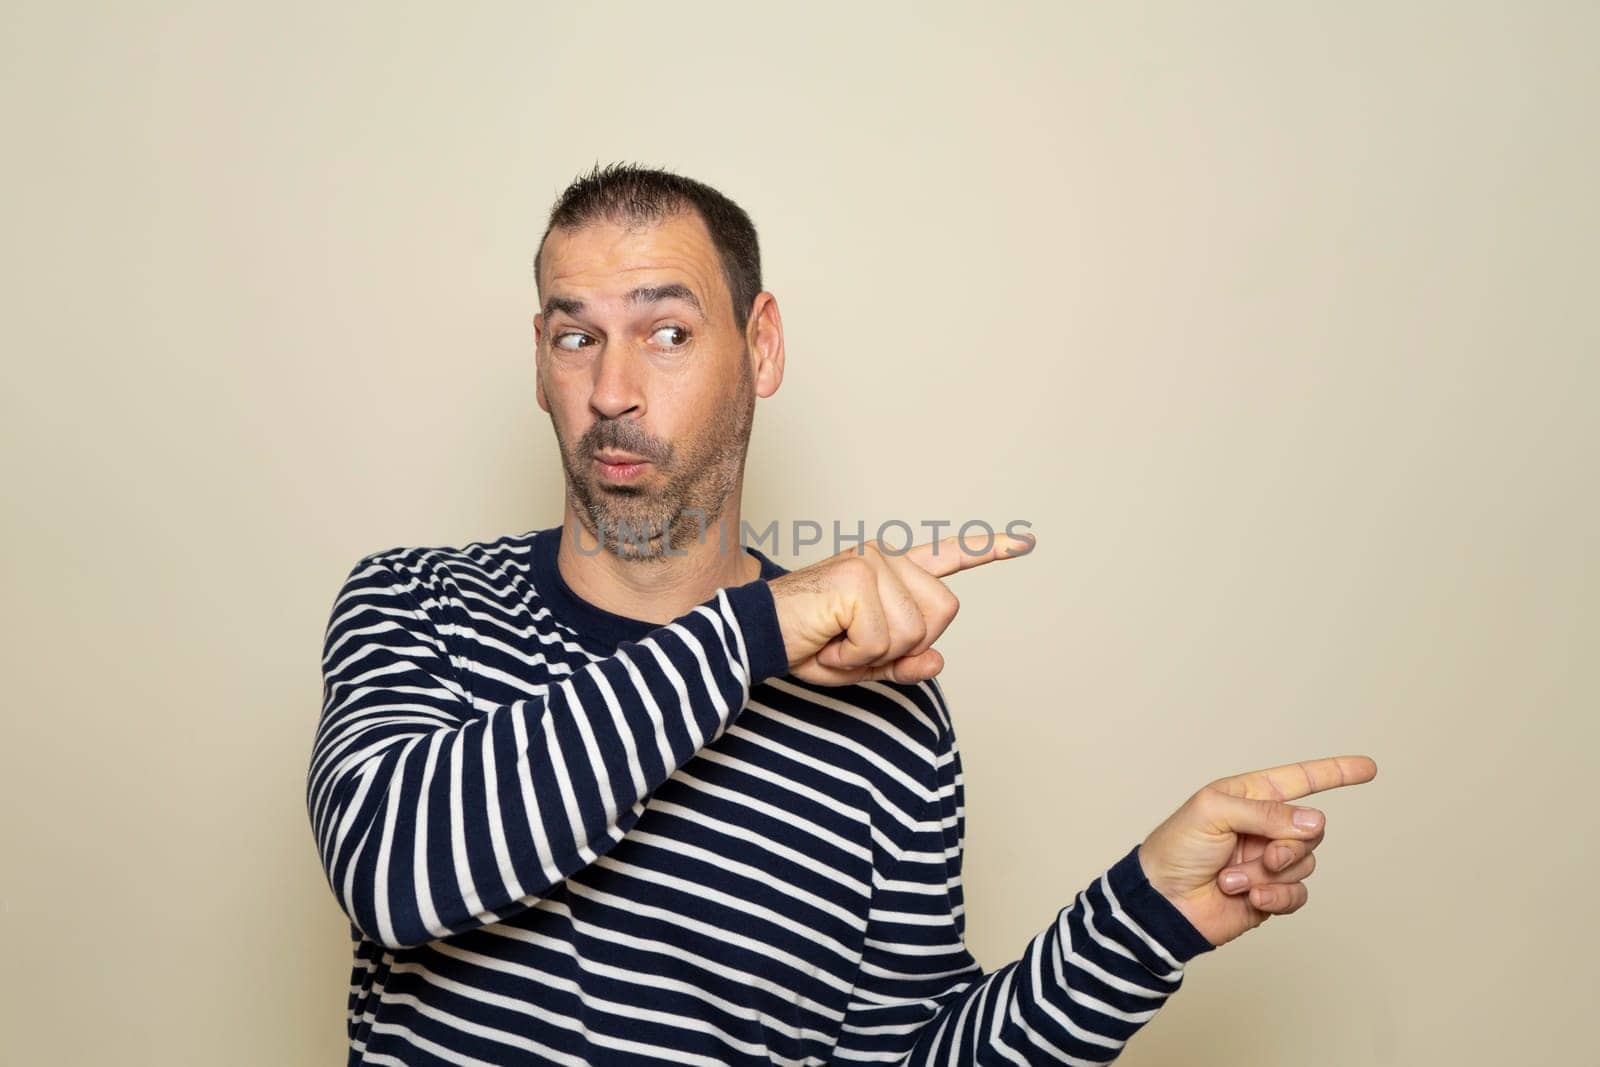 Bearded Hispanic man in his 40s wearing a striped sweater pointing to the side with his index fingers with an expression of surprise. Isolated on beige background. by Barriolo82